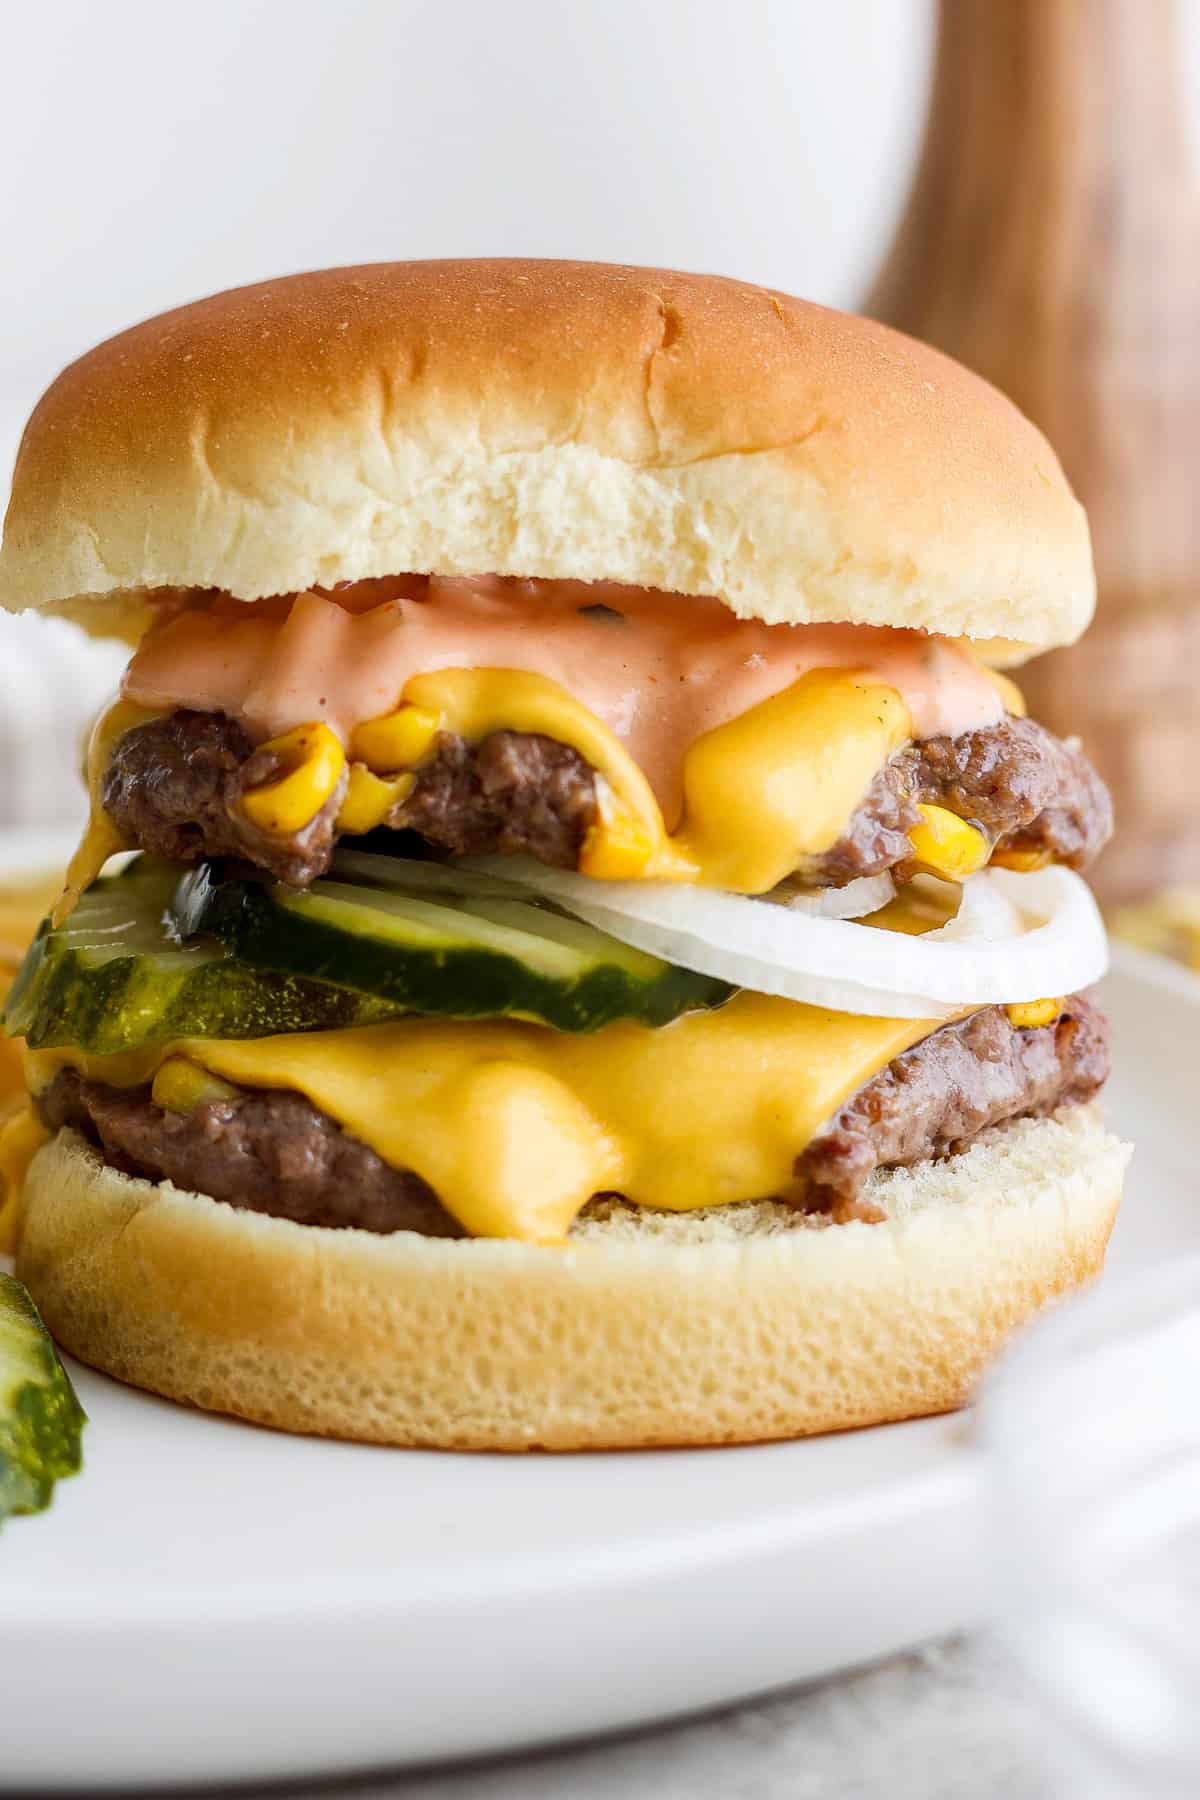 A double cheeseburger with pickles, onions, and sauce on a white plate.